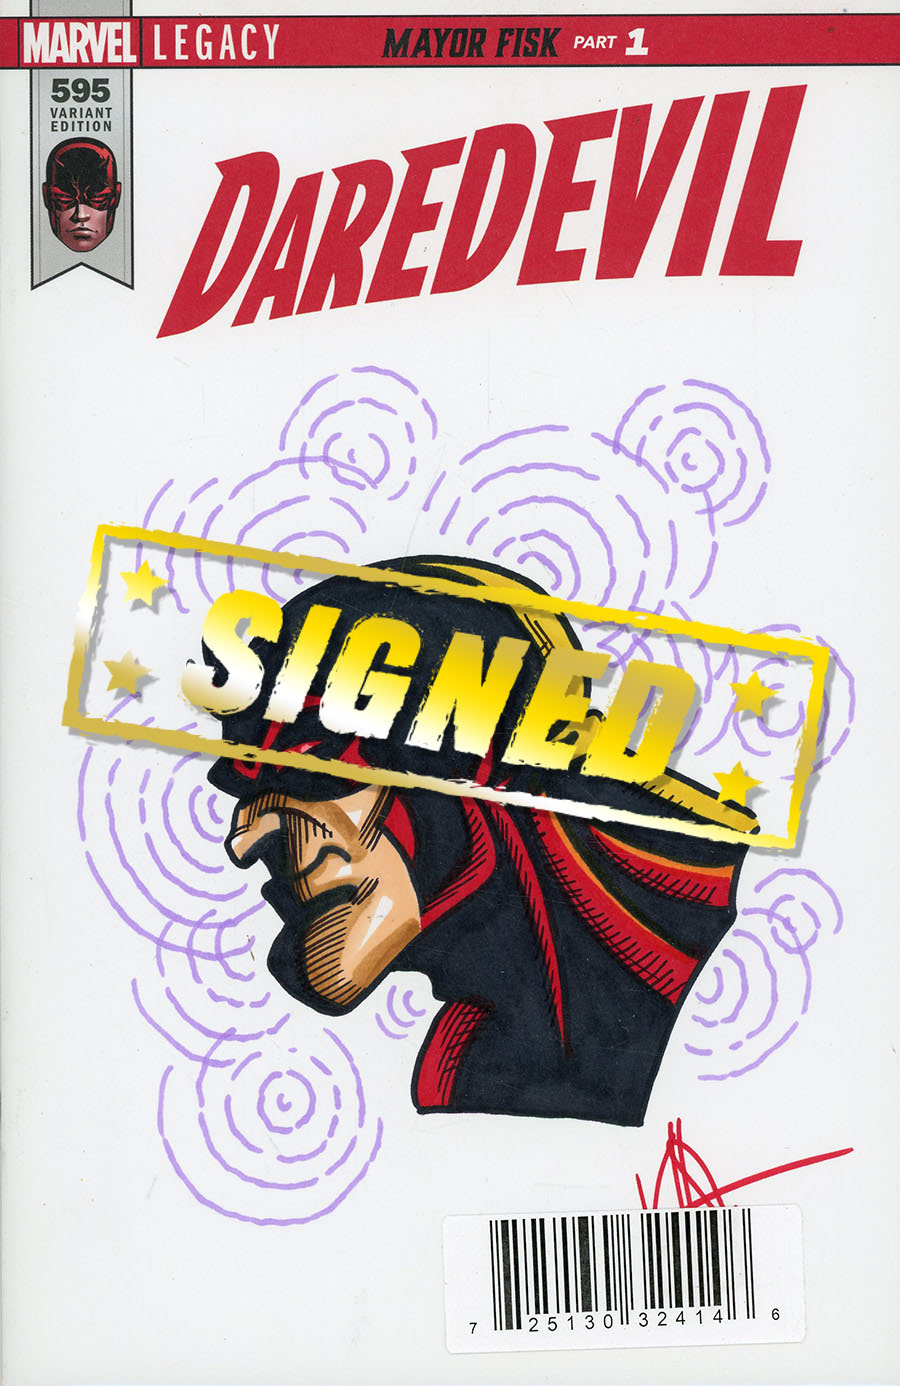 Daredevil Vol 5 #595 Cover I DF Signed & Remarked Commissioned Cover Art By Ken Haeser With A Daredevil Hand-Drawn Sketch